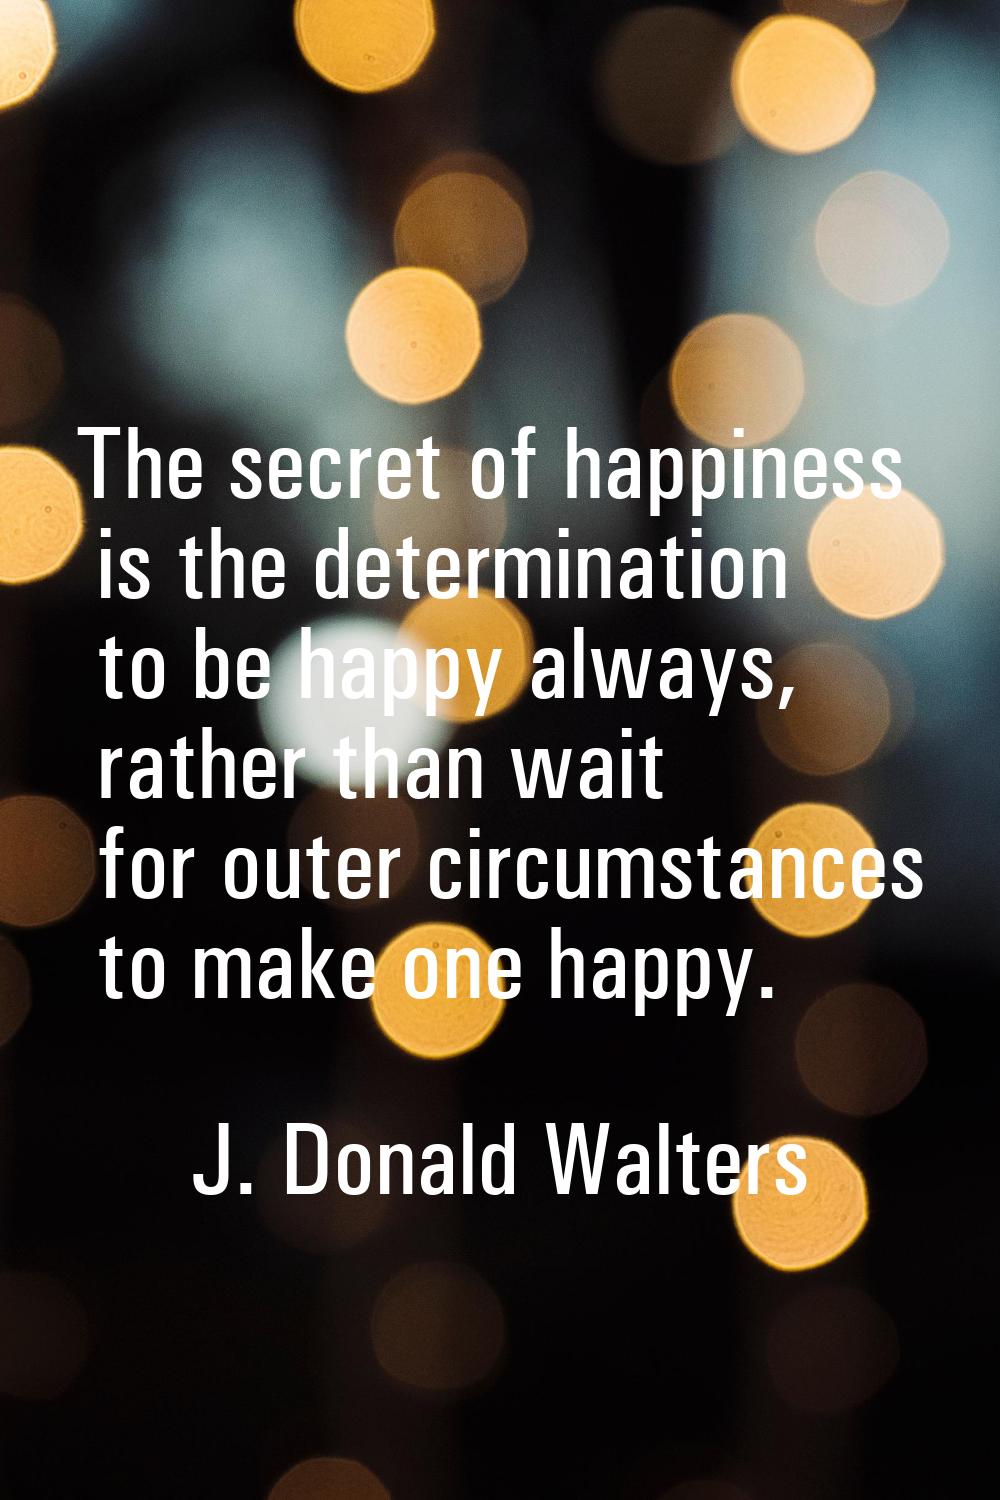 The secret of happiness is the determination to be happy always, rather than wait for outer circums